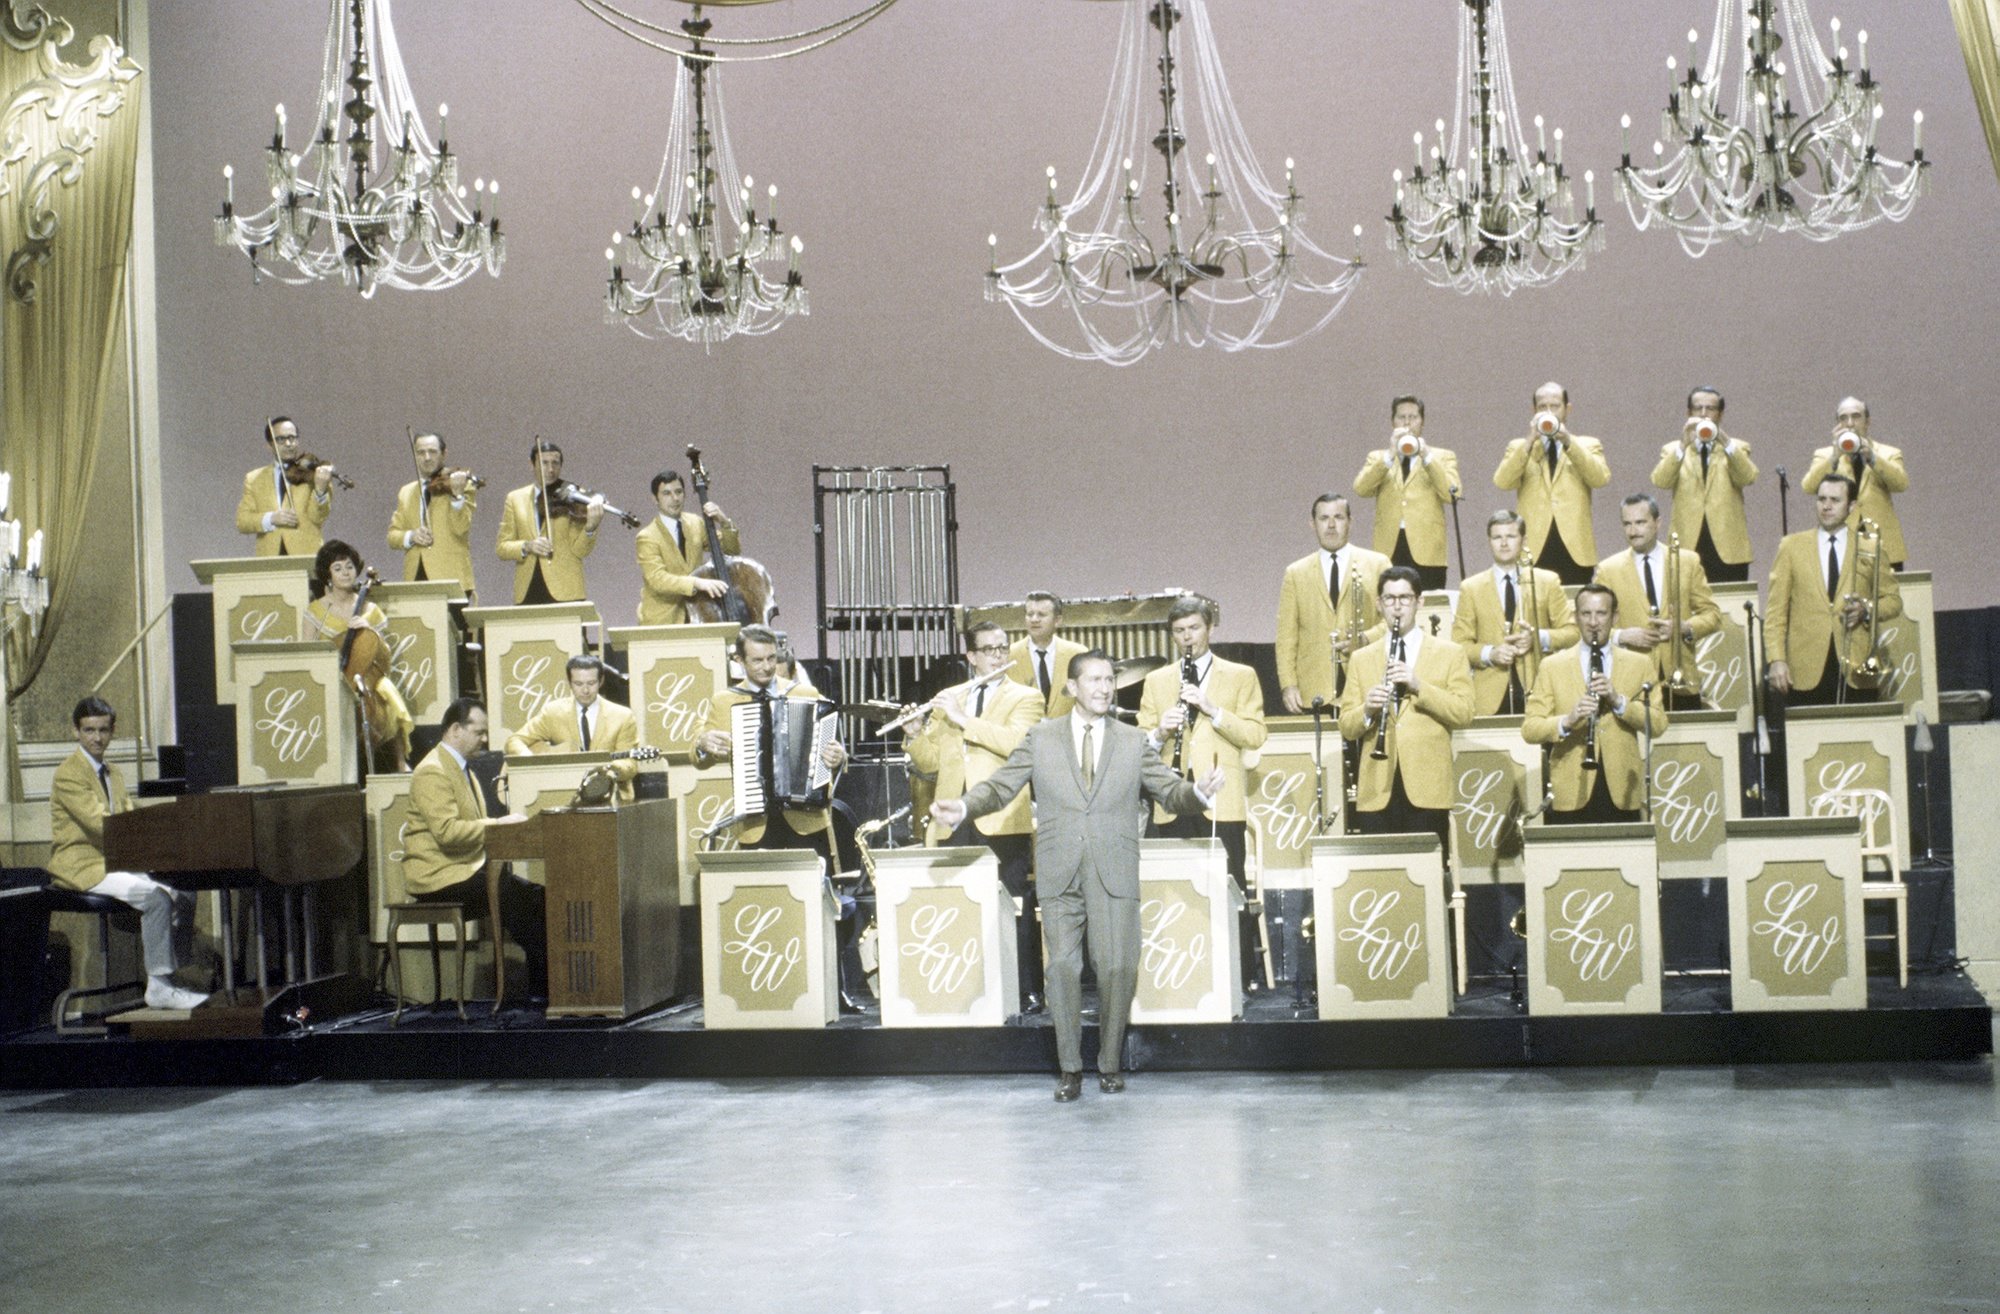 Lawrence Welk on stage in front of a band, under chandeliers